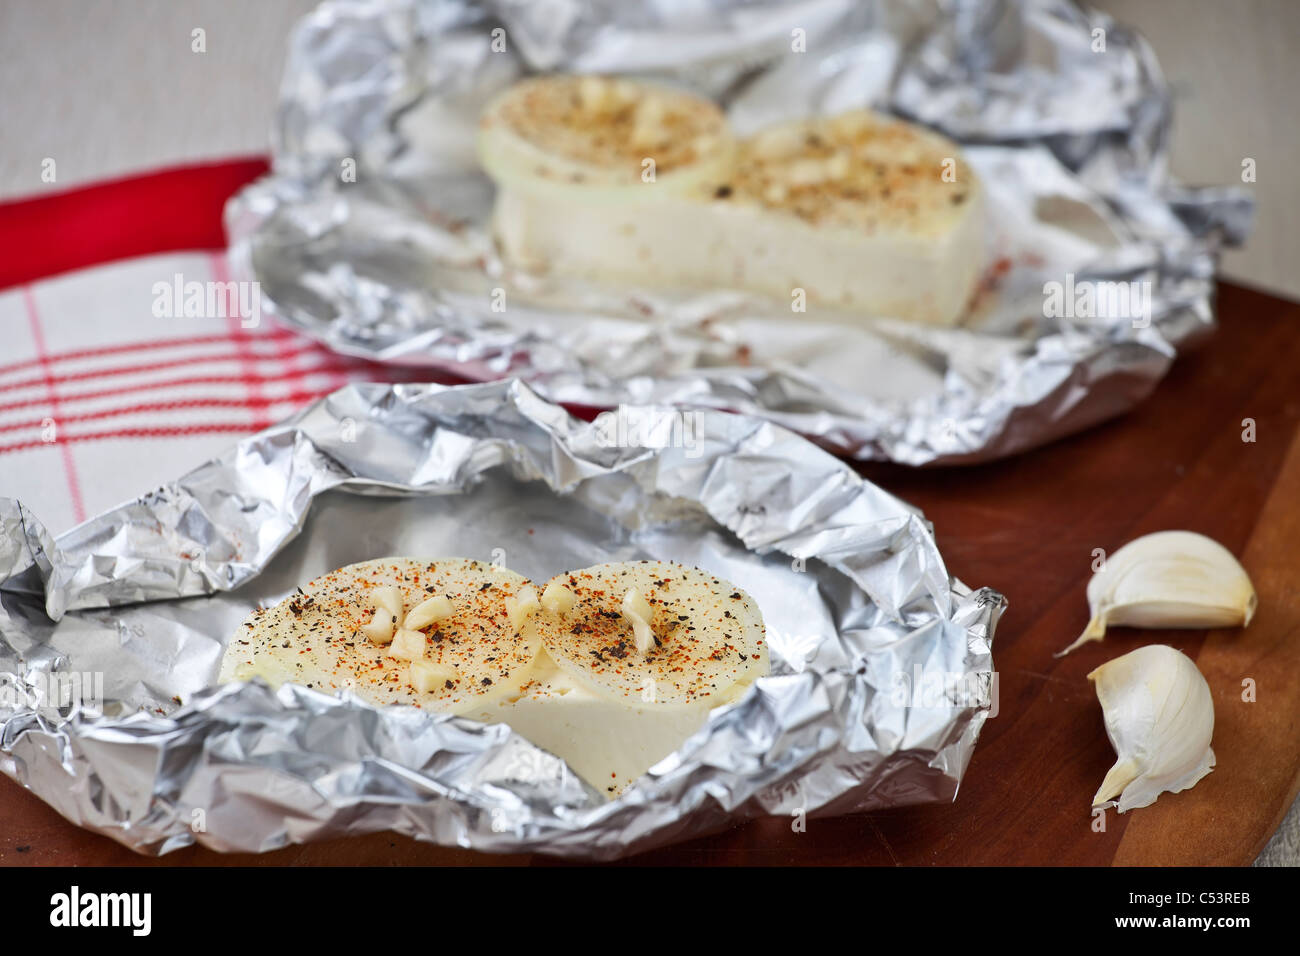 Feta cheese in foil with onions, spices and garlic Stock Photo